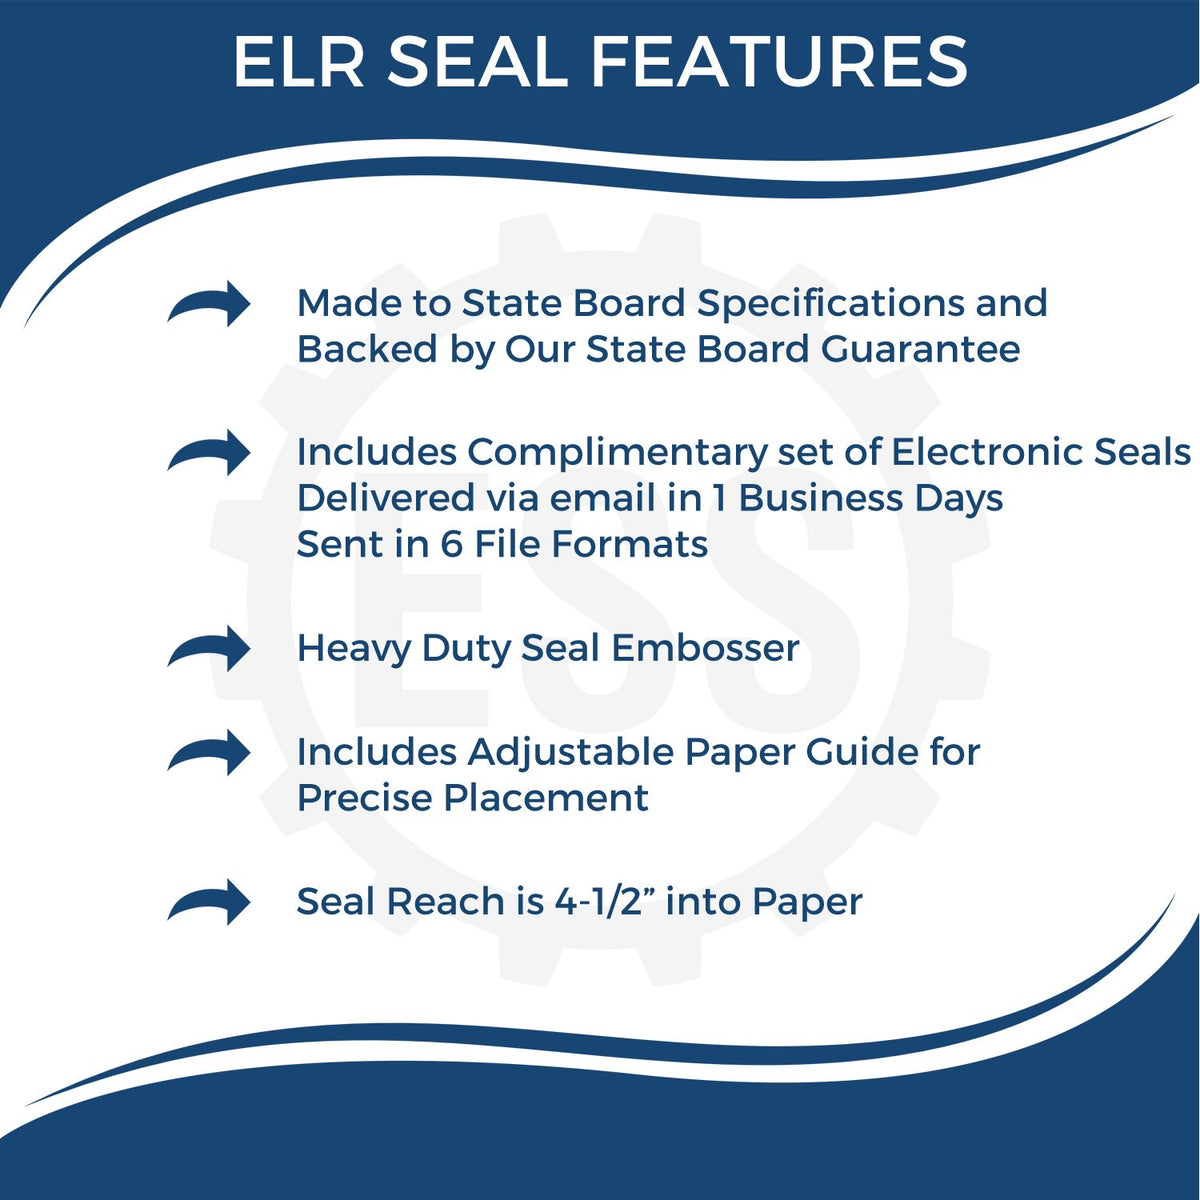 A picture of an infographic highlighting the selling points for the State of Delaware Extended Long Reach Engineer Seal